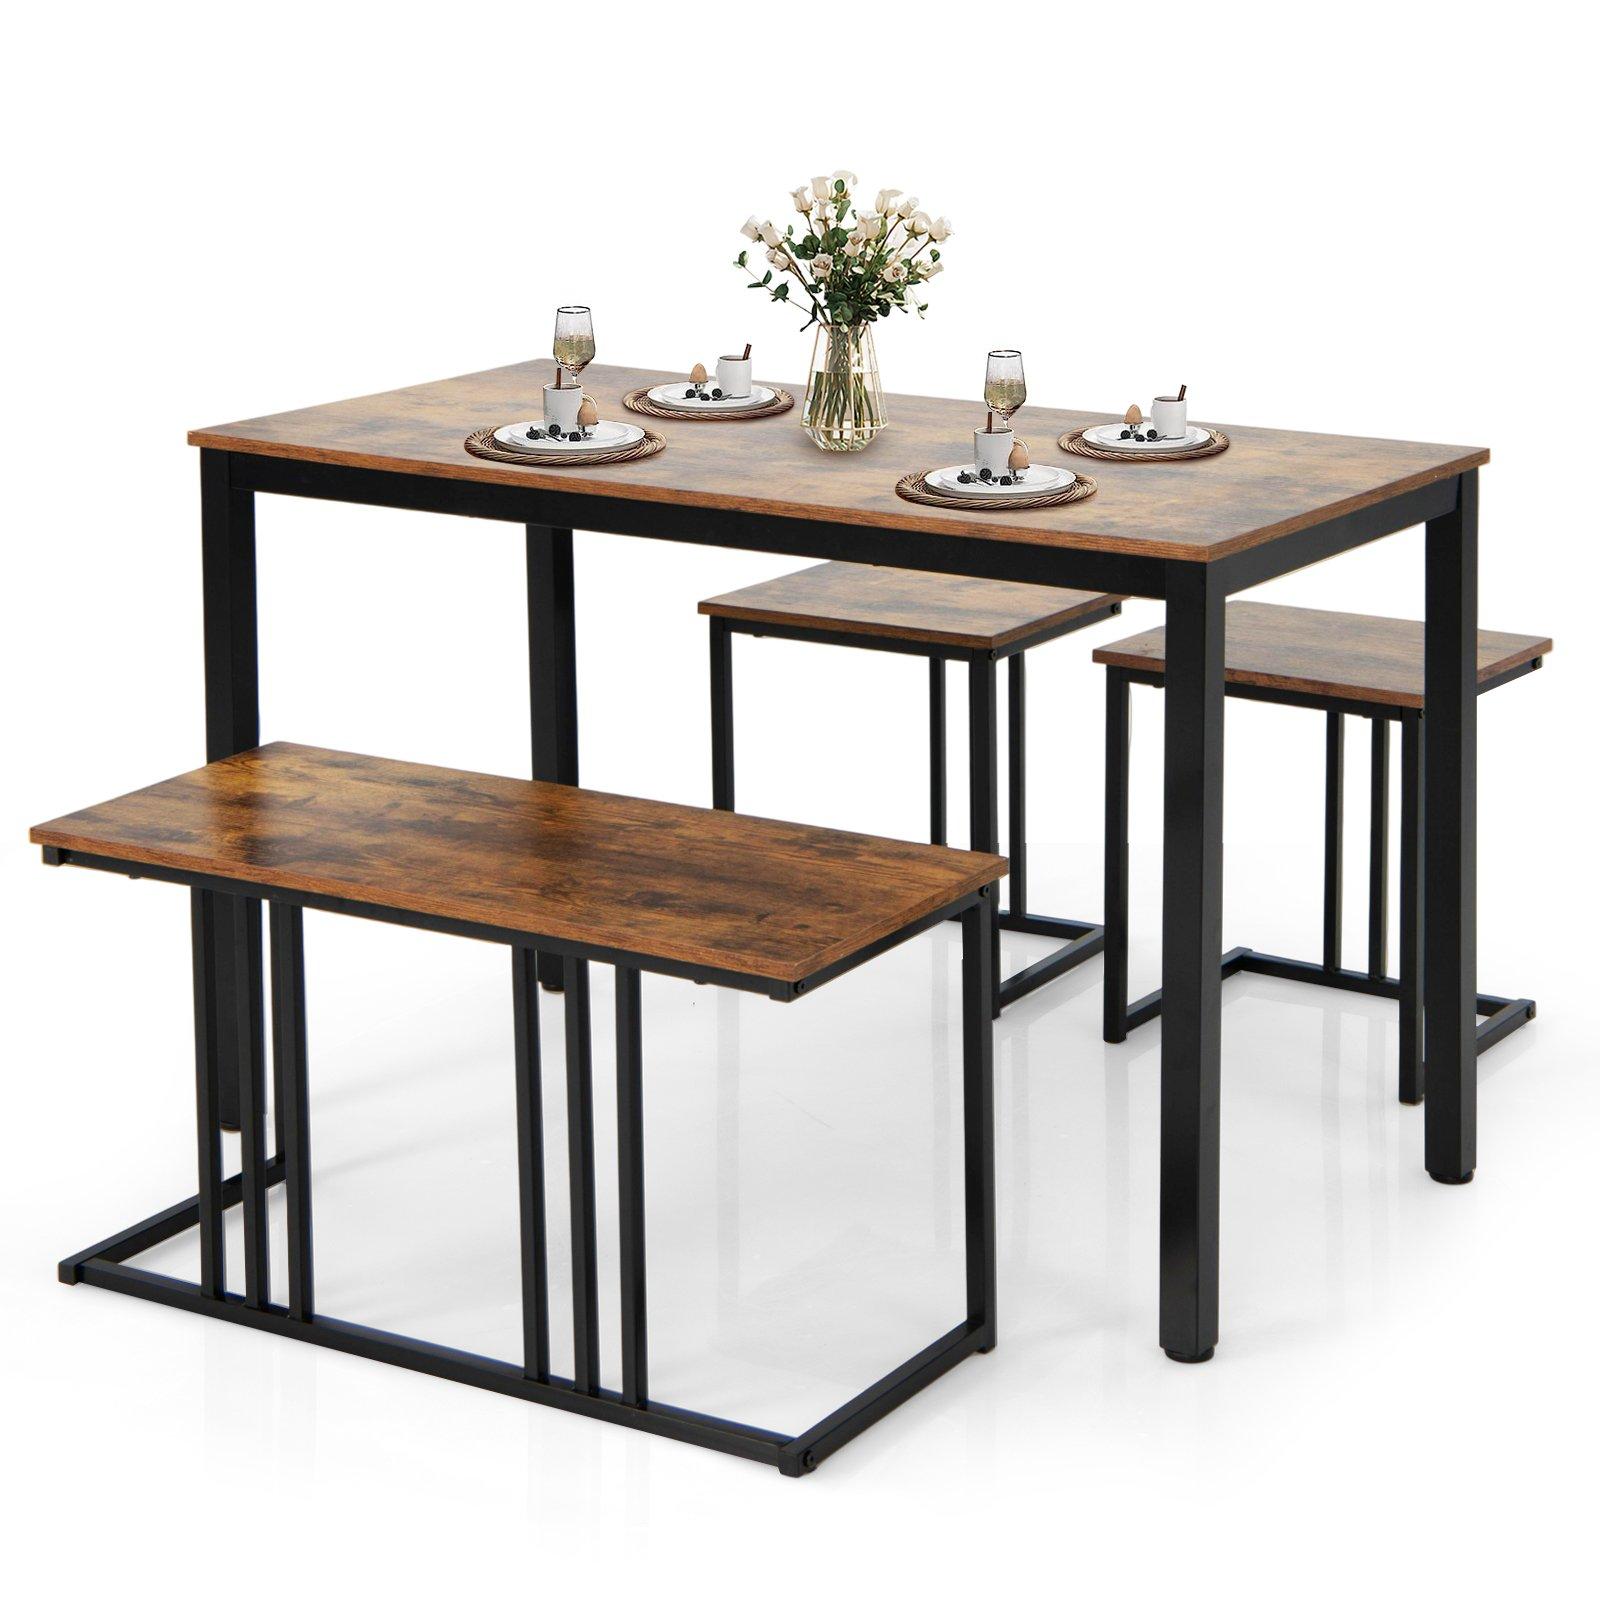 4 PCS Industrial Dining Table & Chair Set Kitchen Table Bench 2 Stools